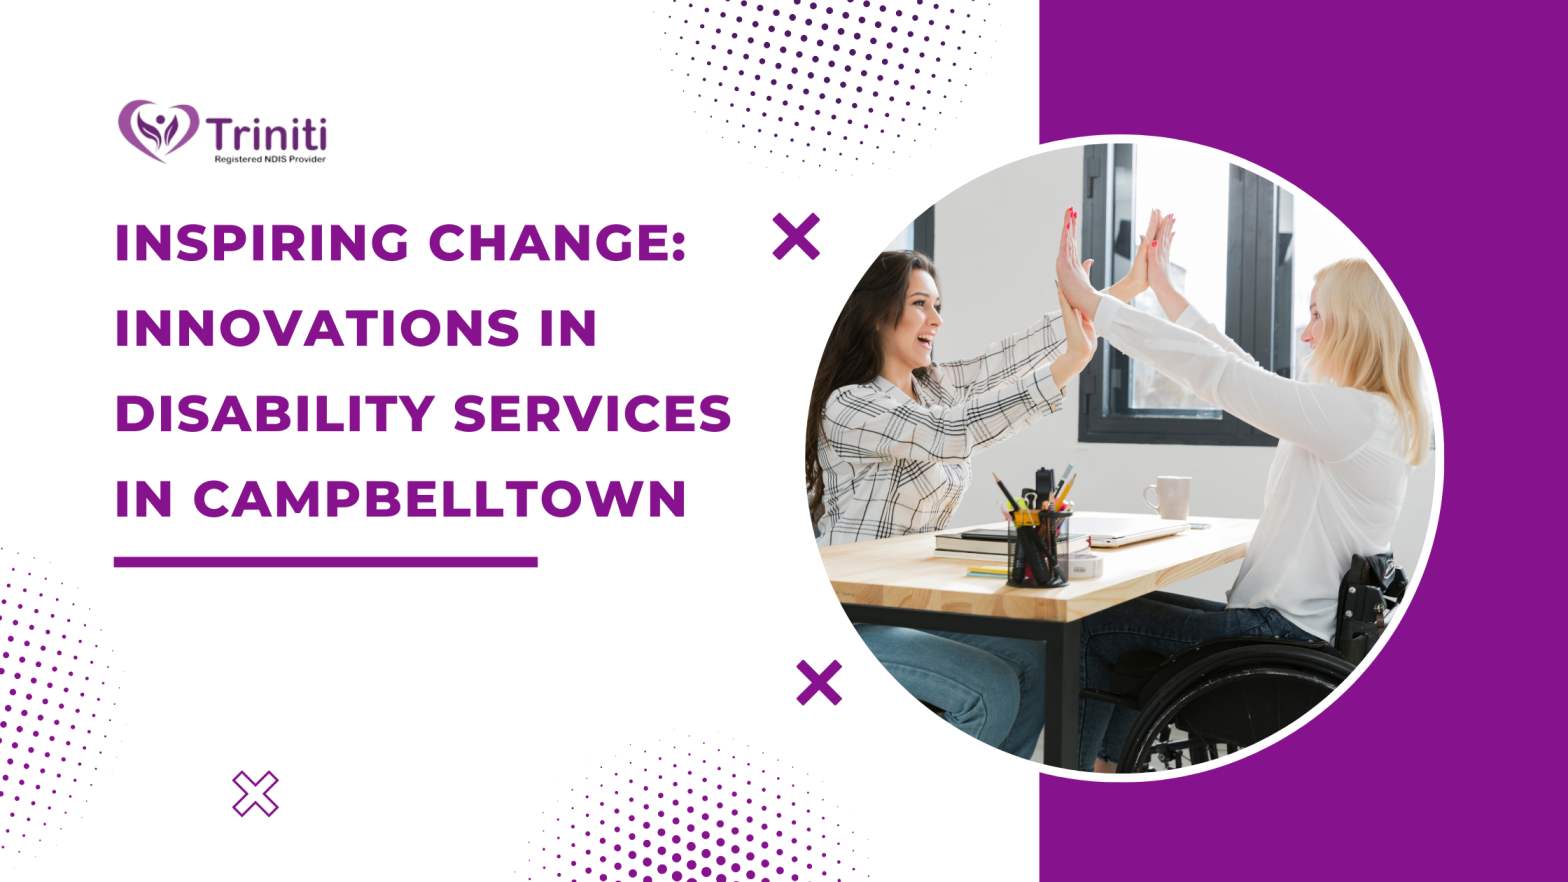 Inspiring Change: Innovations in Disability Services in Campbelltown